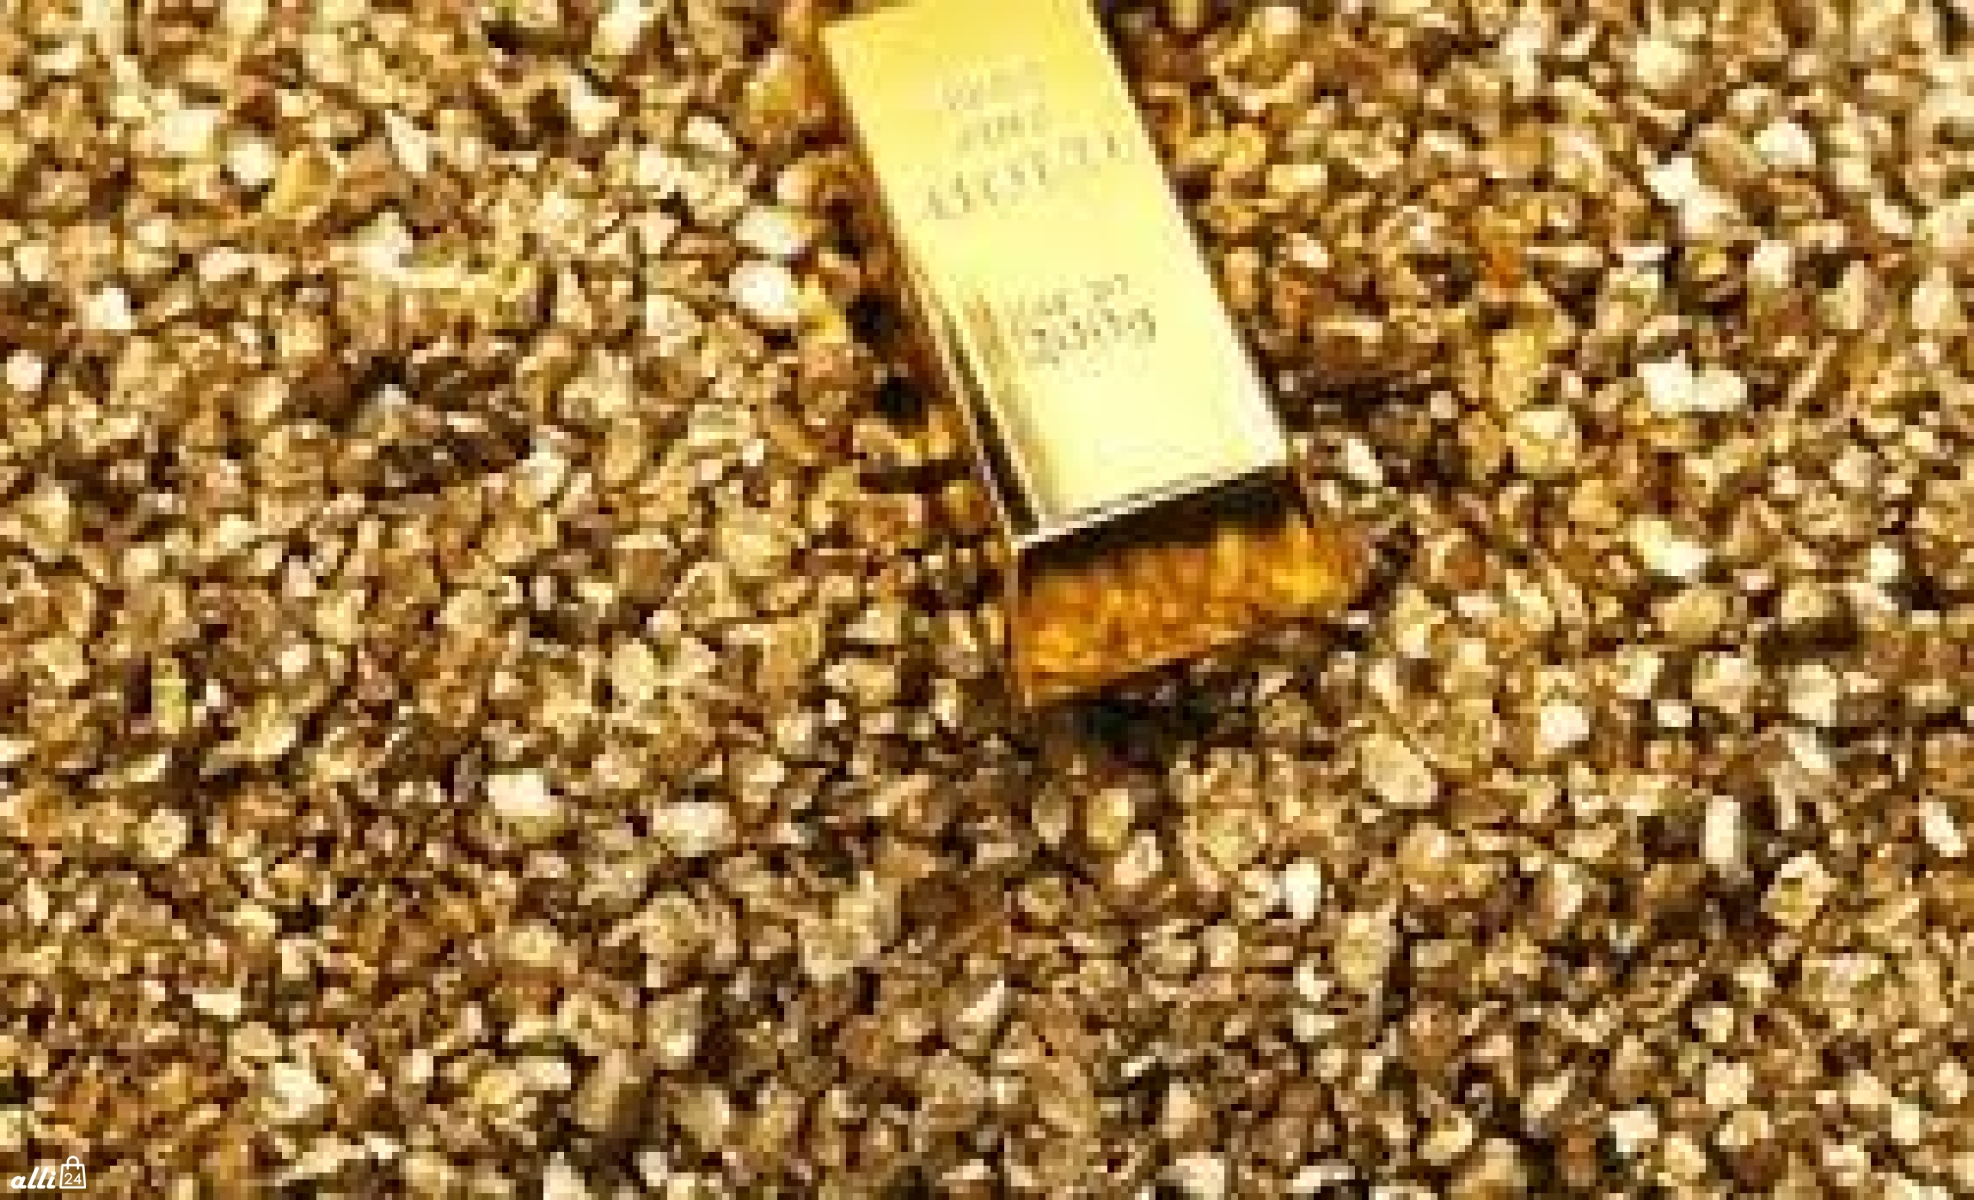 The Real AfricanM.OGold nuggets and Bars+2771­54517­04 for sale at great price’’in weden,Saudi arabi